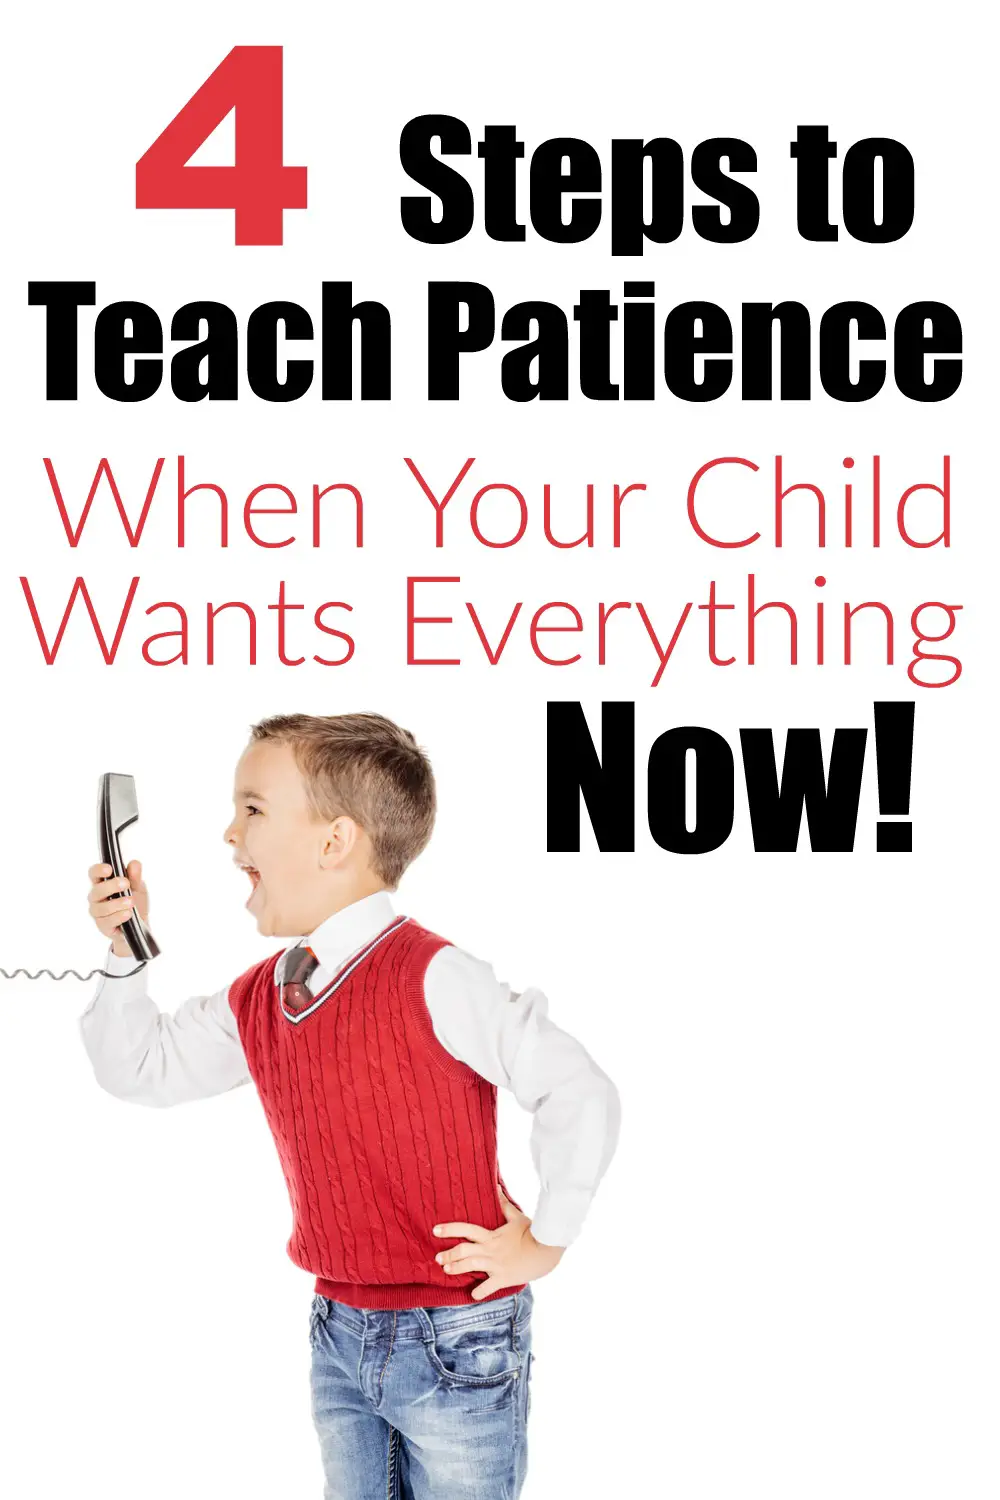 4 steps to teach patience to your child. Patience is difficult to teach because we have to show them ourselves.